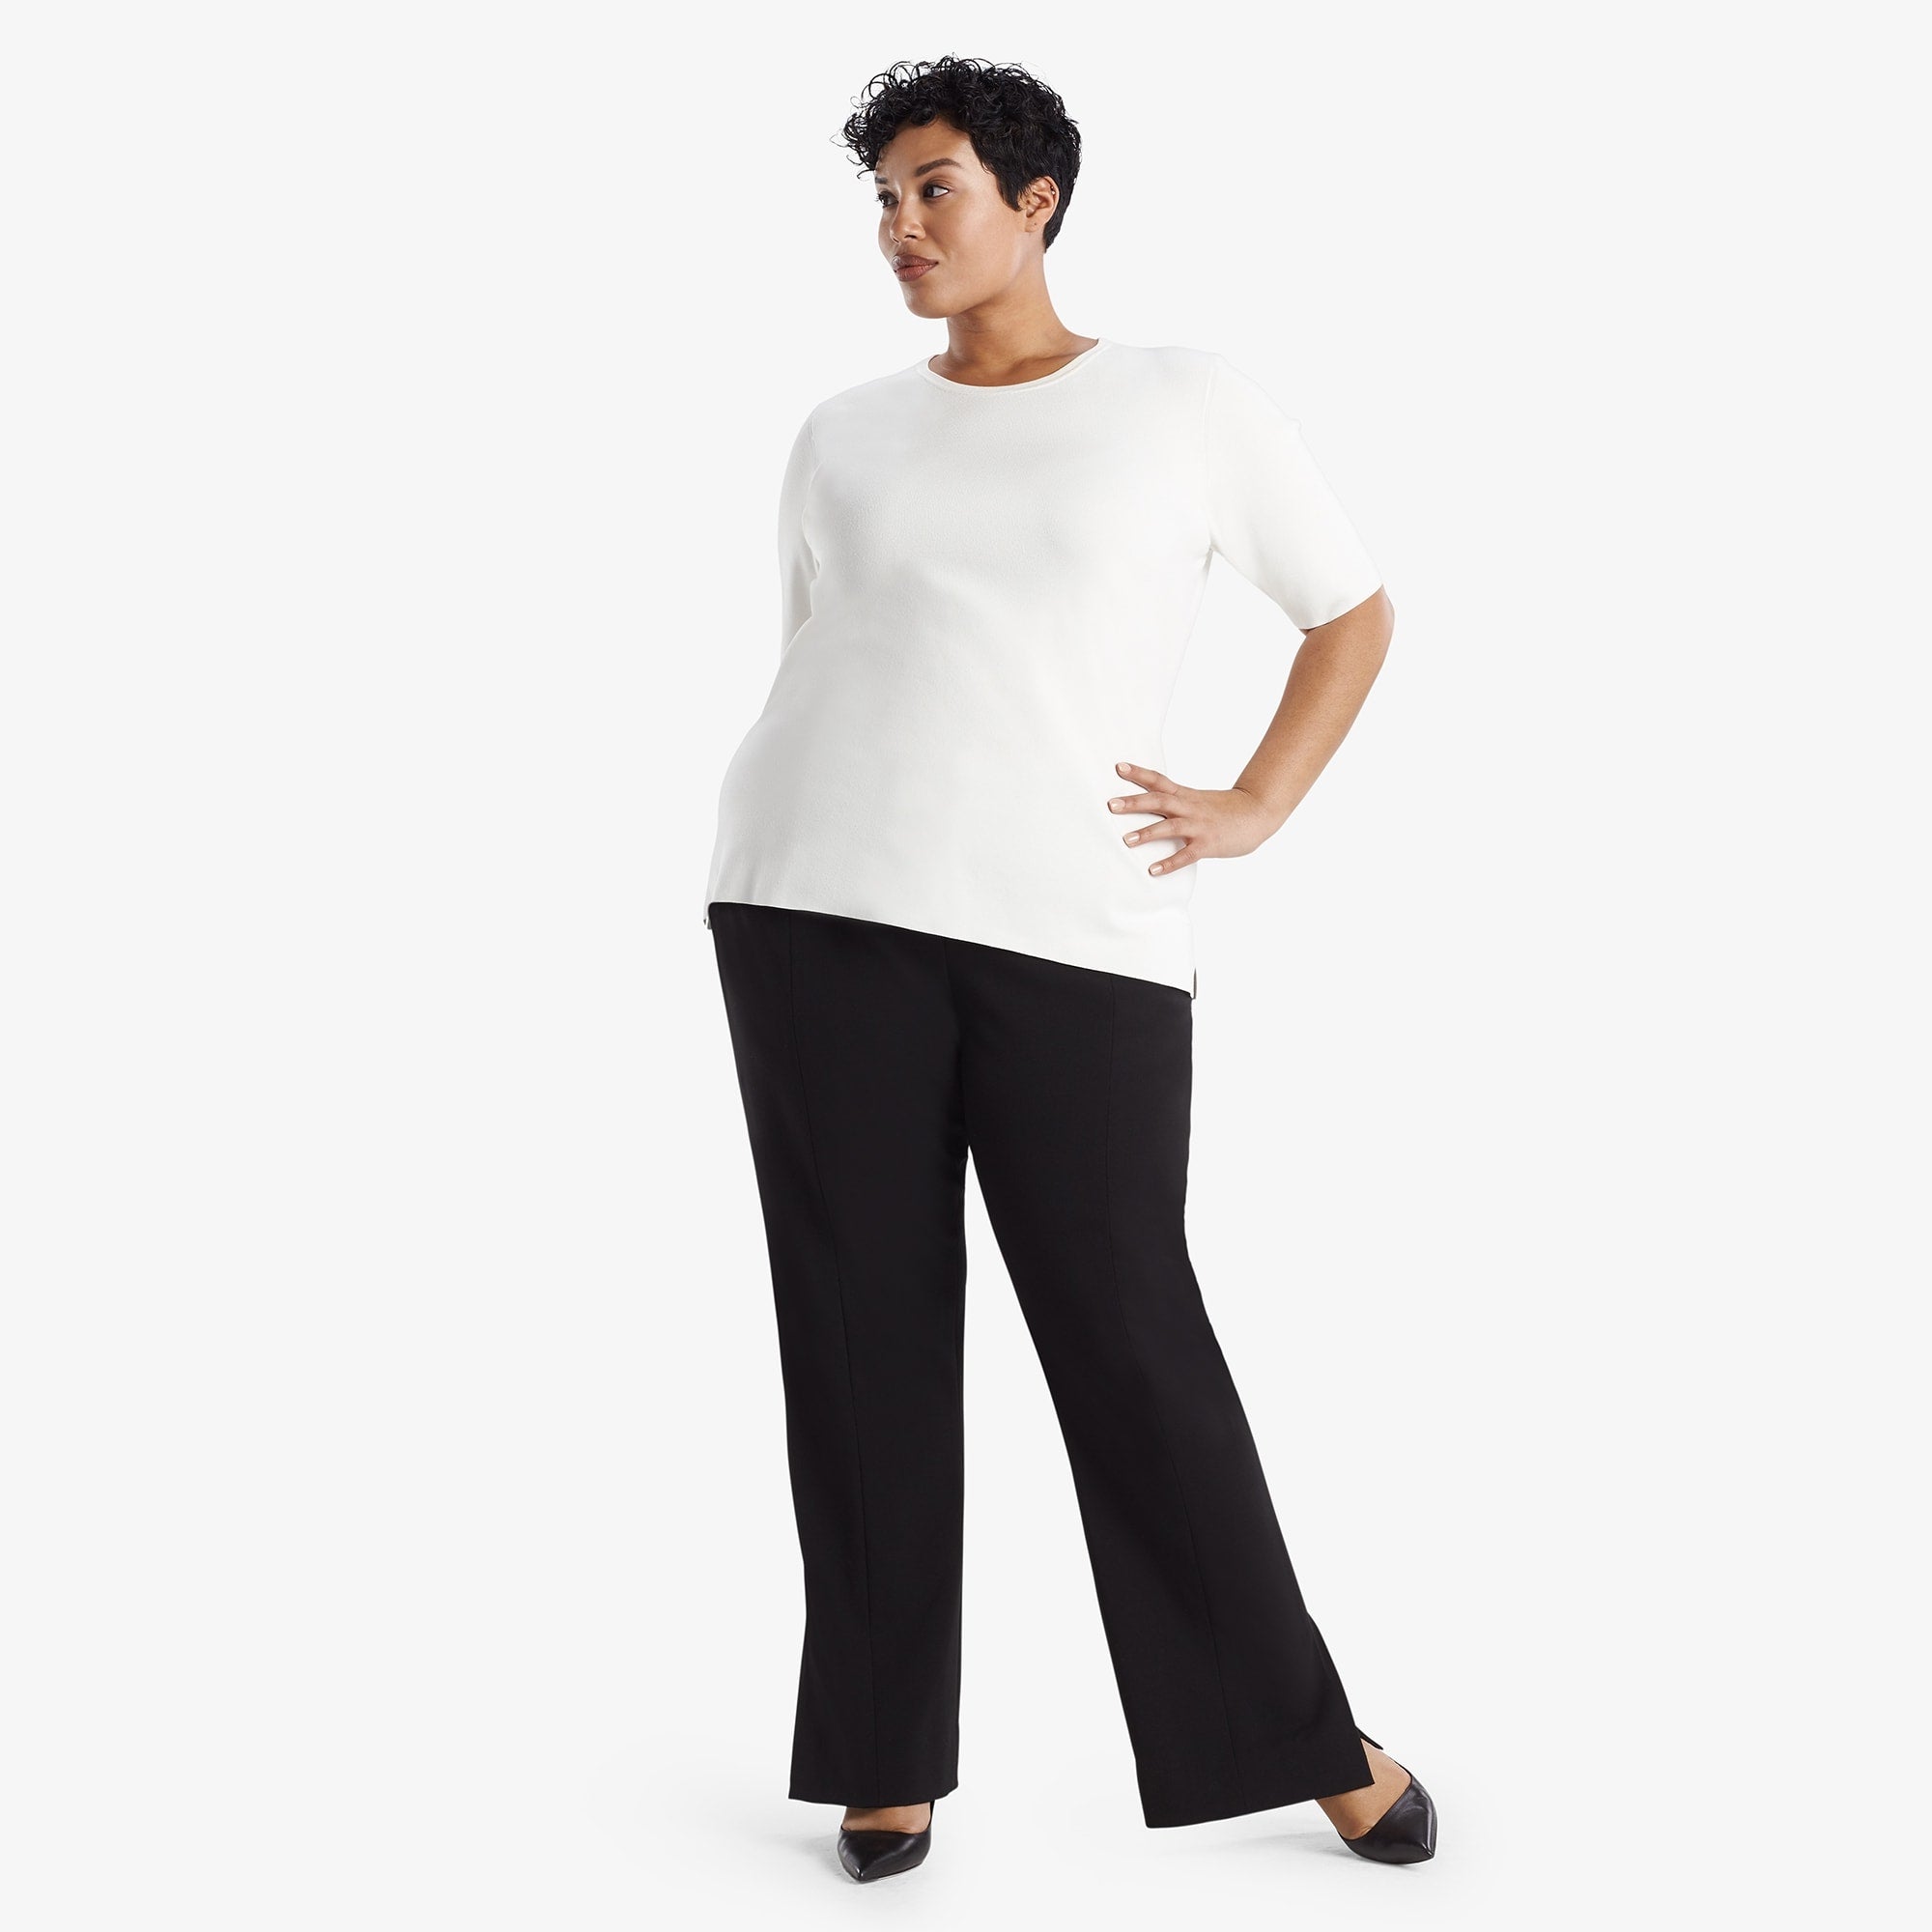 Hero image of a woman standing wearing the Mercado Pant in black 